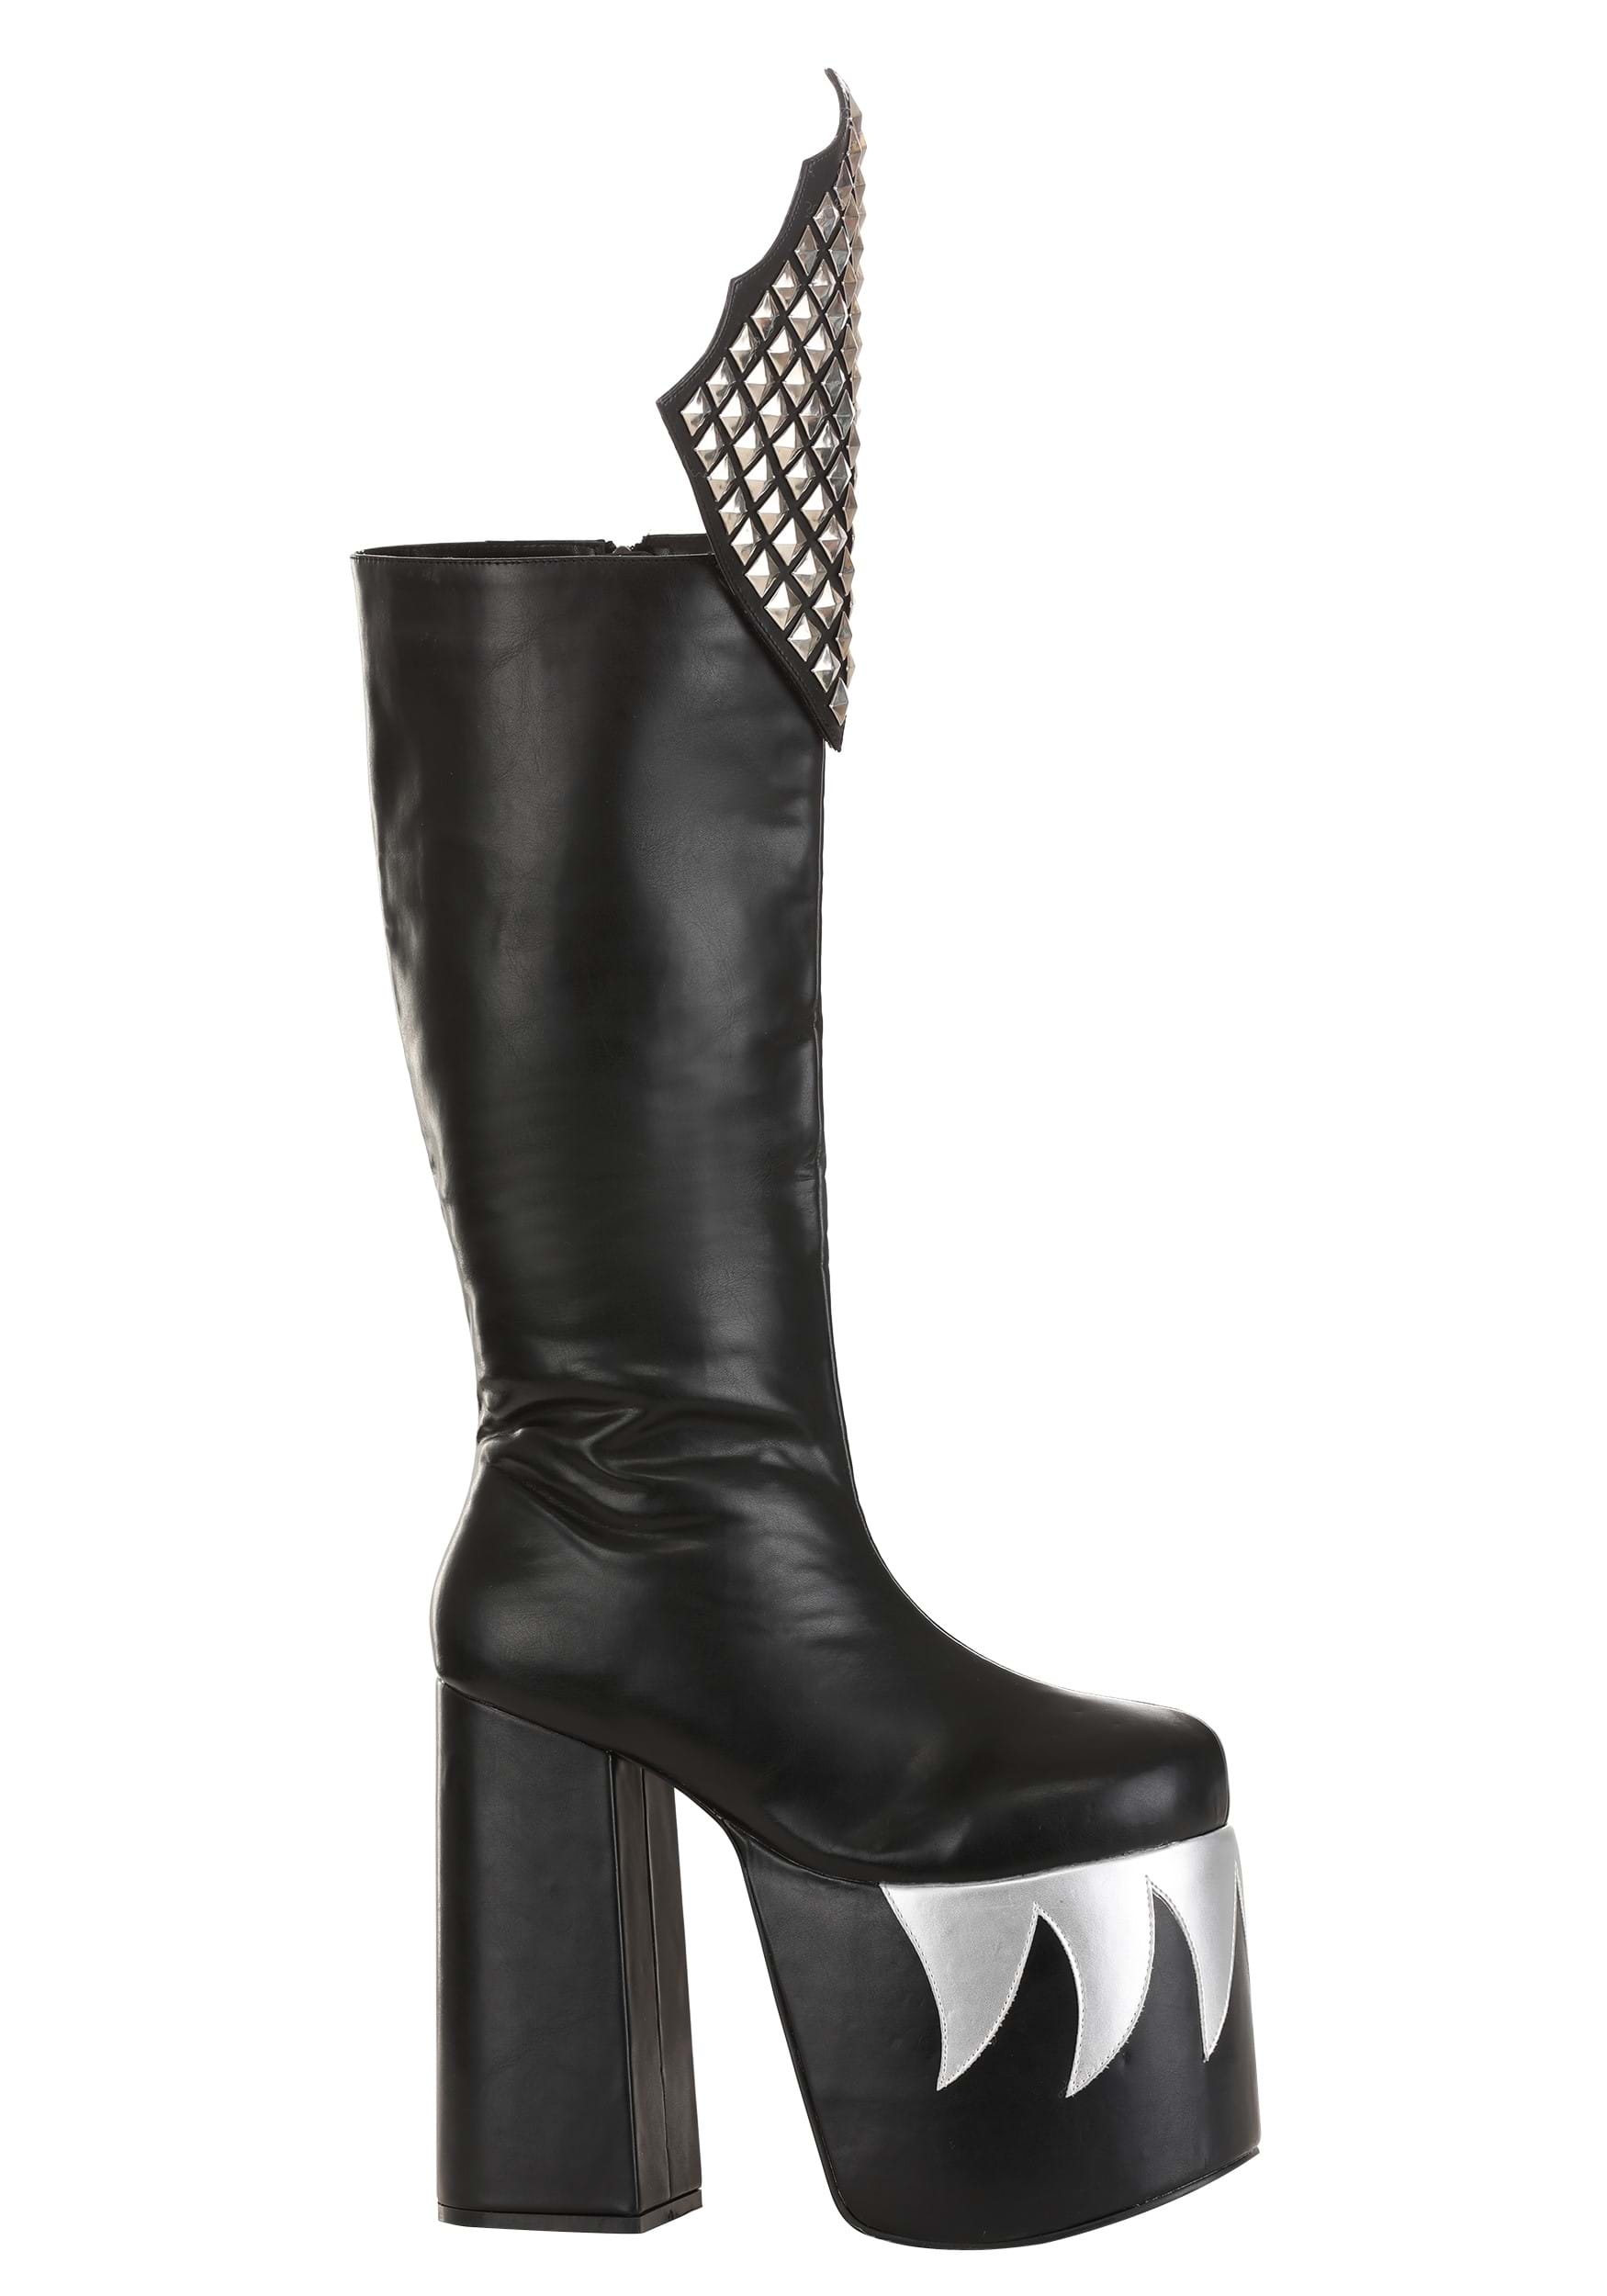 KISS Demon Boots , Exclusive Costume Boots